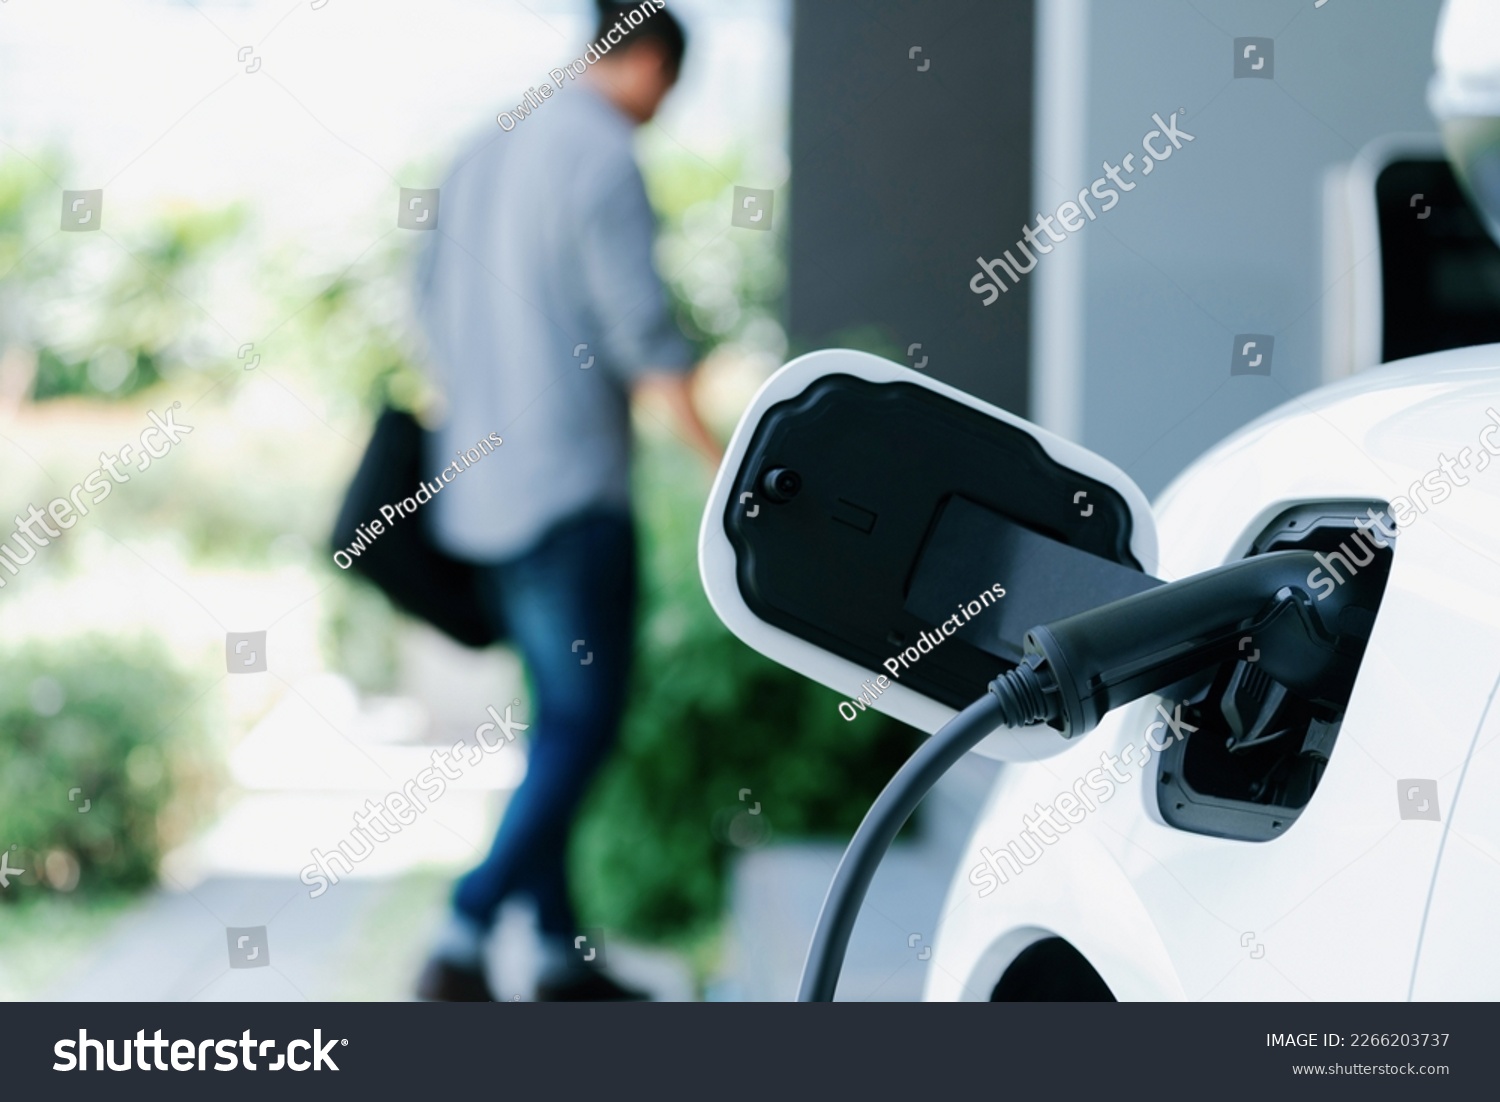 Focus electric car charging at home charging station with blurred progressive man walking in the background. Electric car using renewable clean for eco-friendly concept. #2266203737